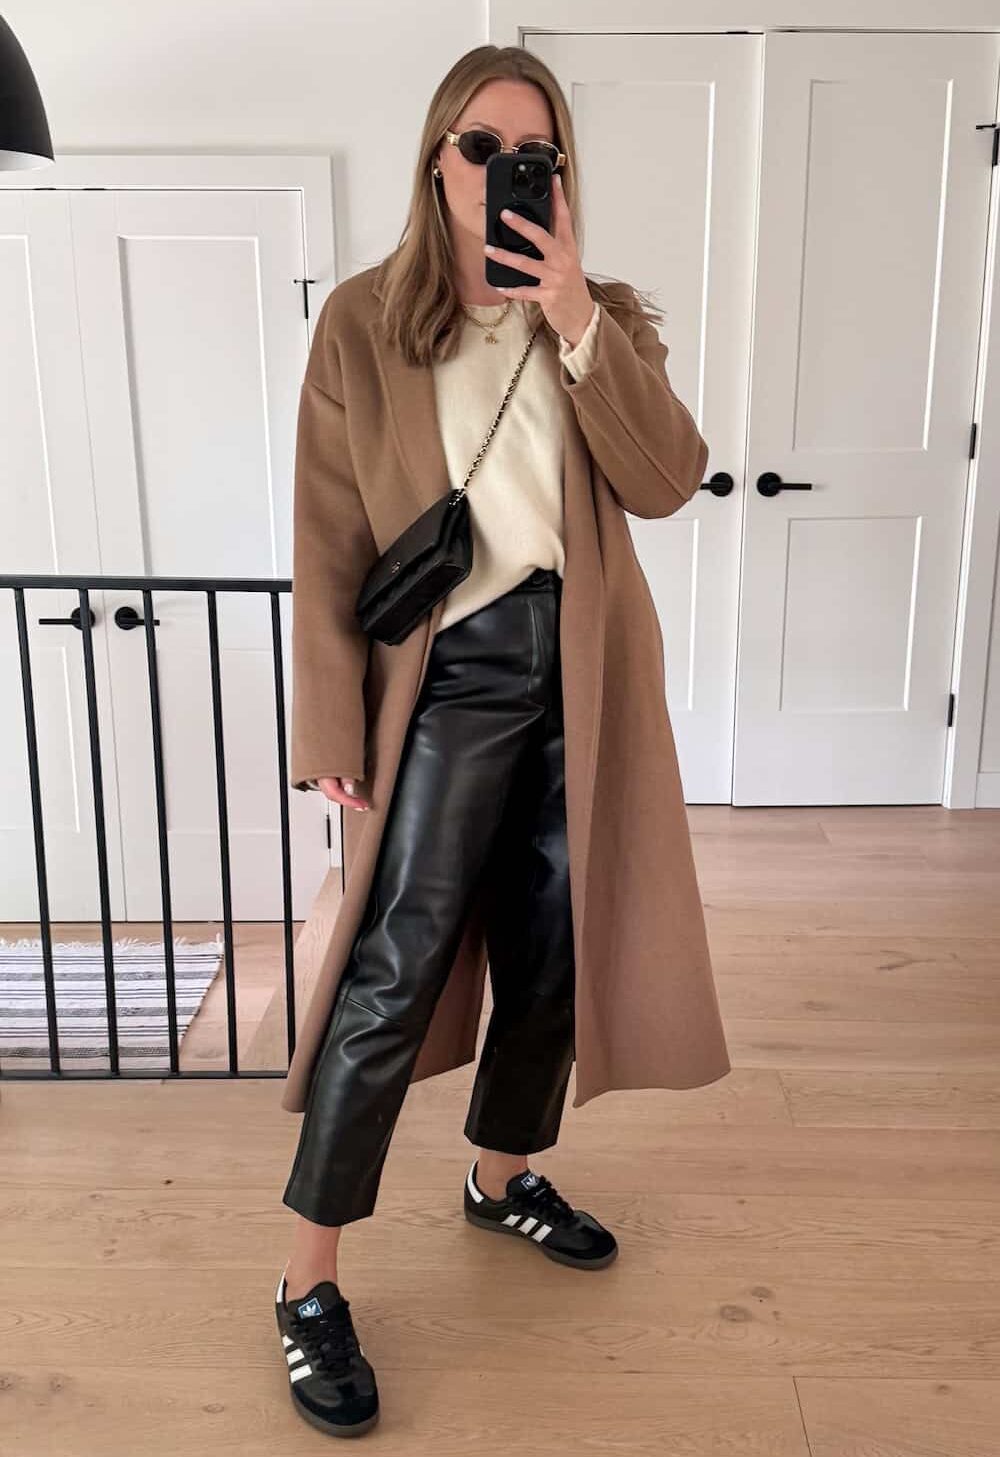 Christal wearing black leather pants, black sneakers, a white sweater and a tan trench coat.